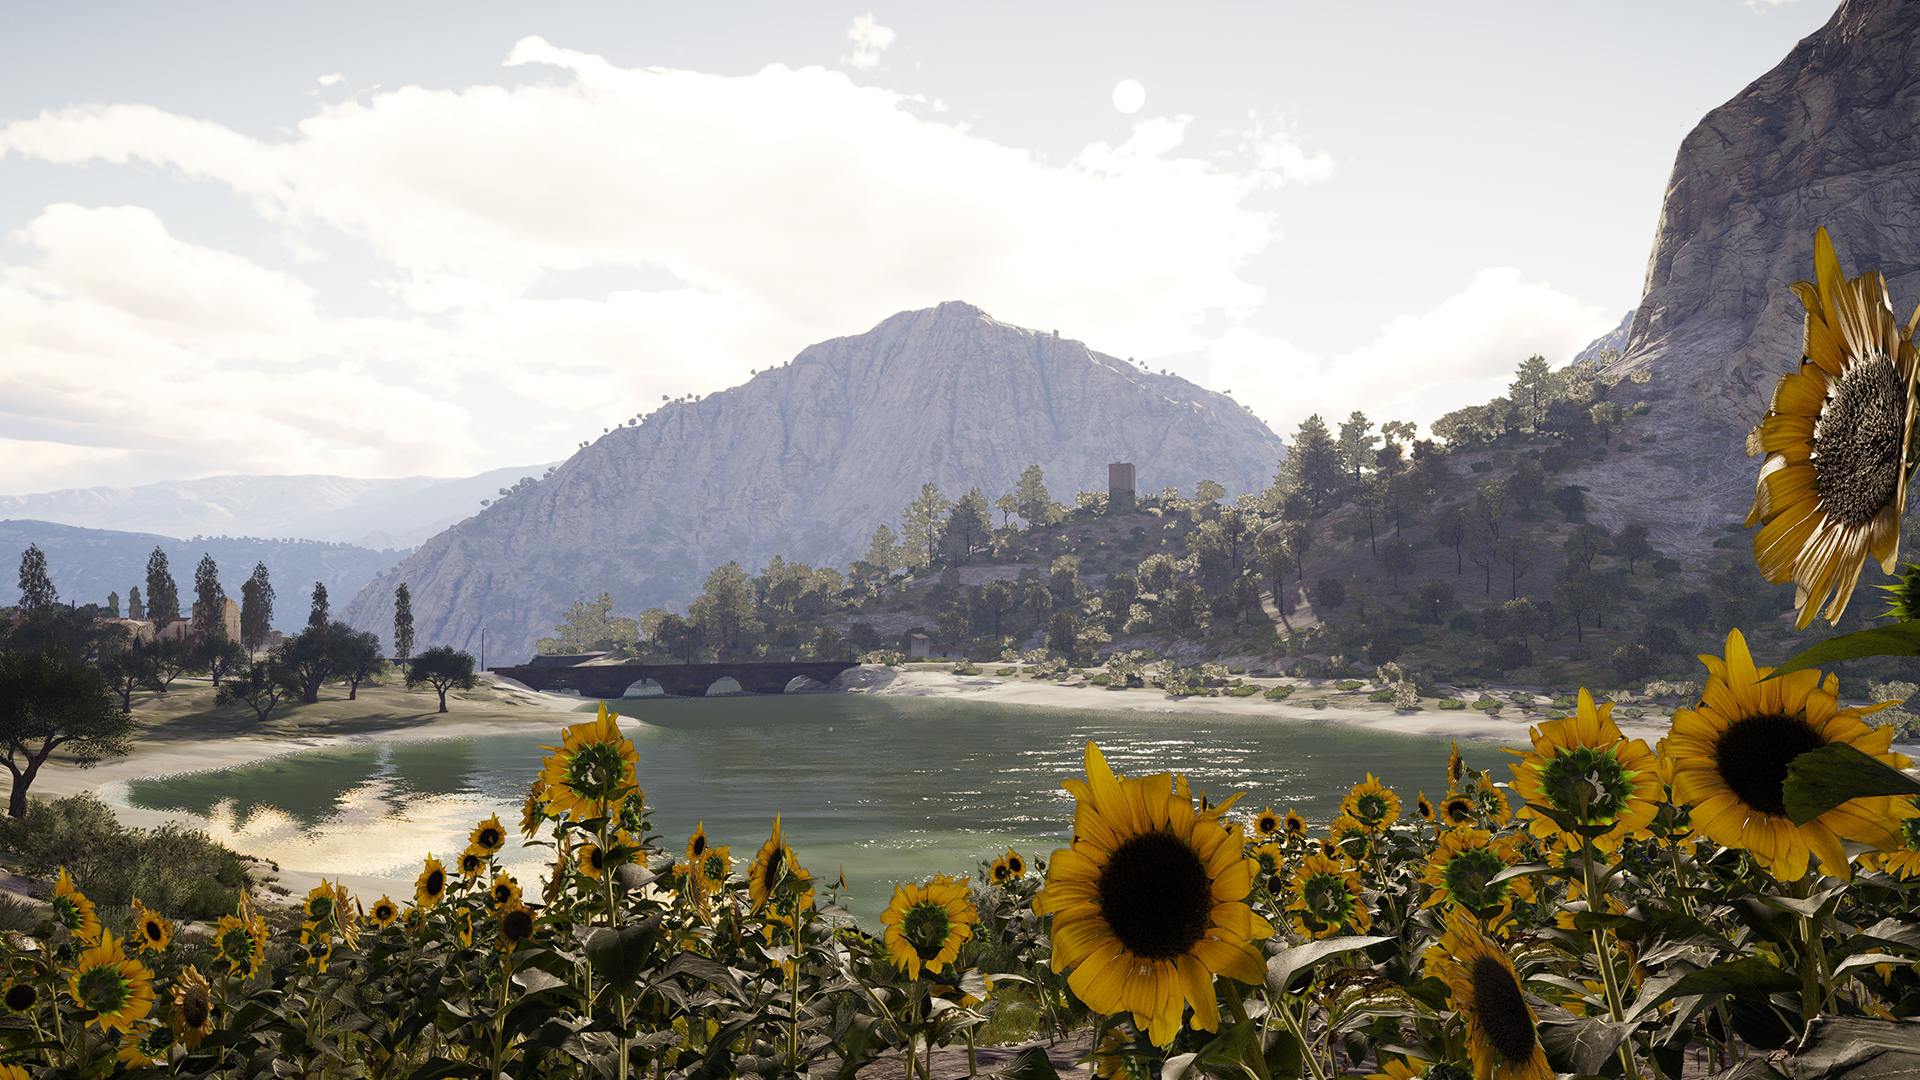 A field of sunflowers in Aguas Claras, The Angler's third reserve, located in Spain.